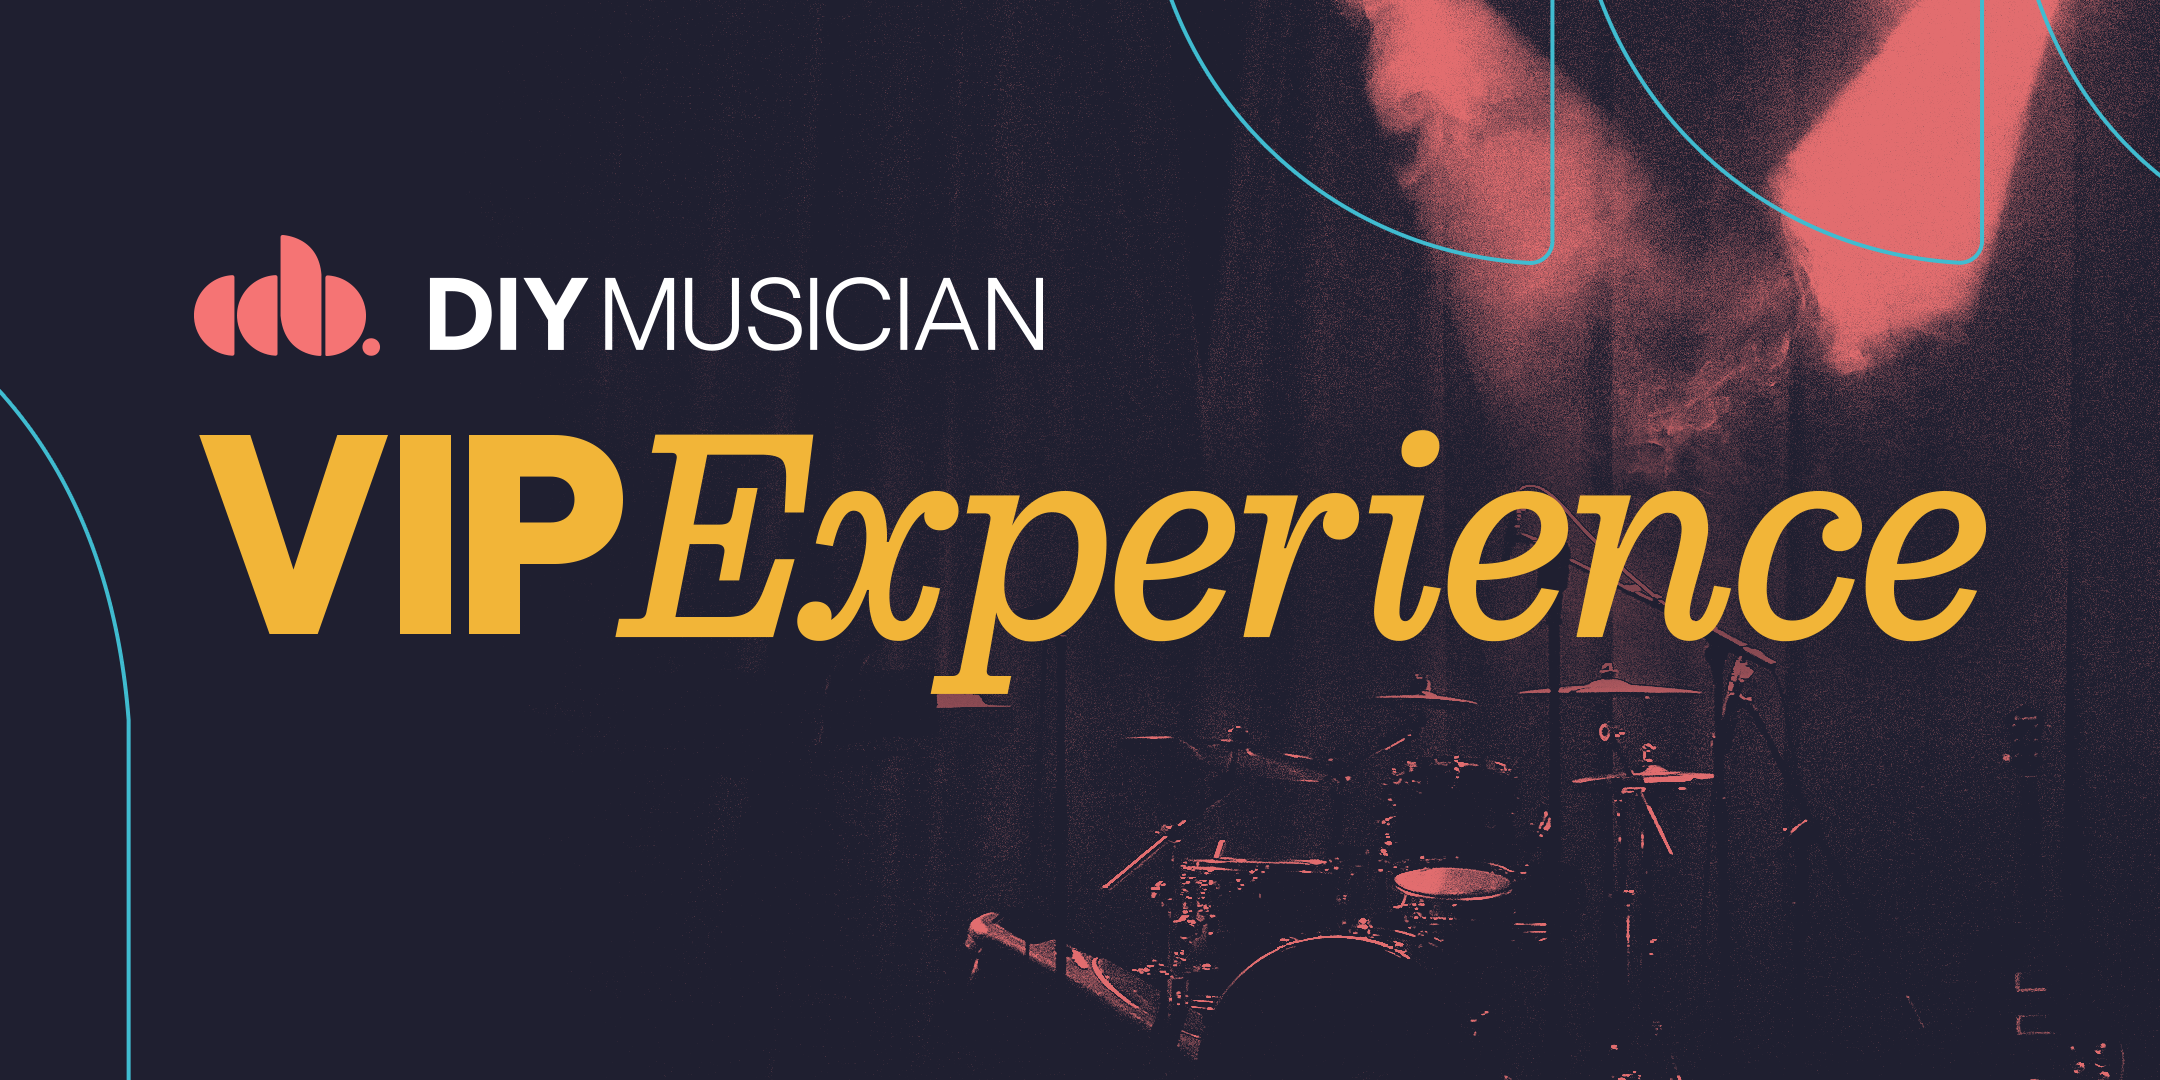 Announcing the DIY Musician VIP Experience in Nashville!